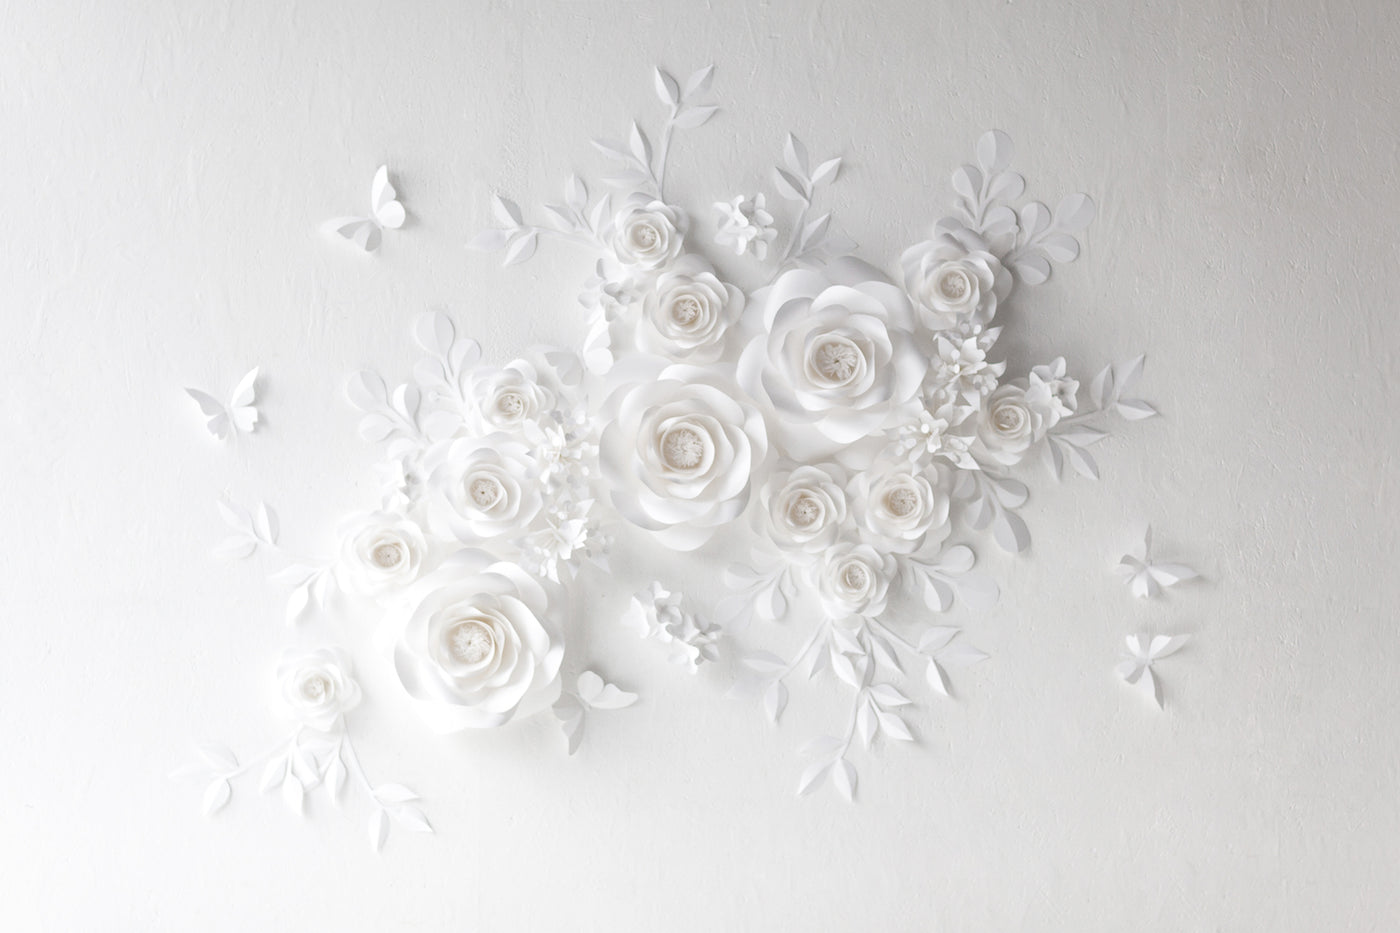 Pure Serenity: White Paper Flowers as a Backdrop for Creating a Tranquil Setting